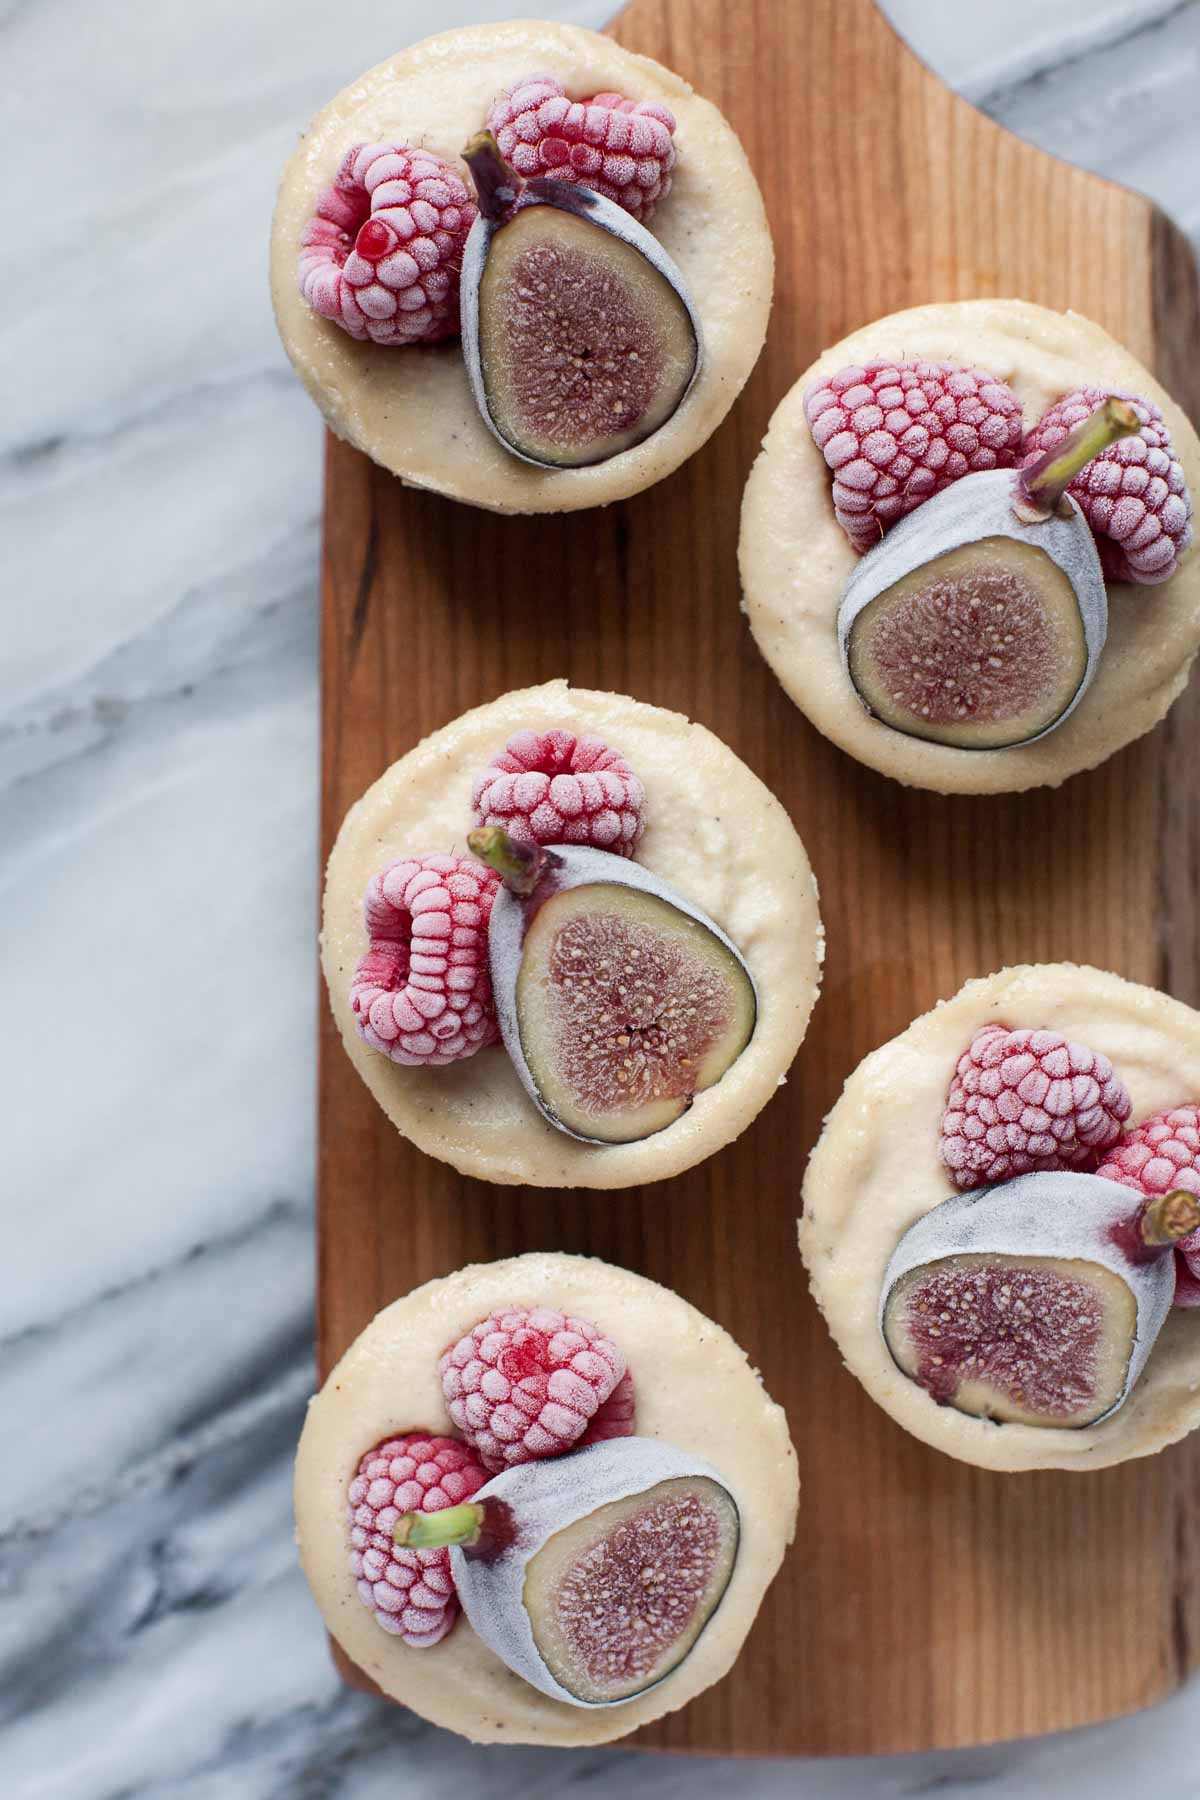 Vanilla Bean Cheesecakes with Figs and Raspberries